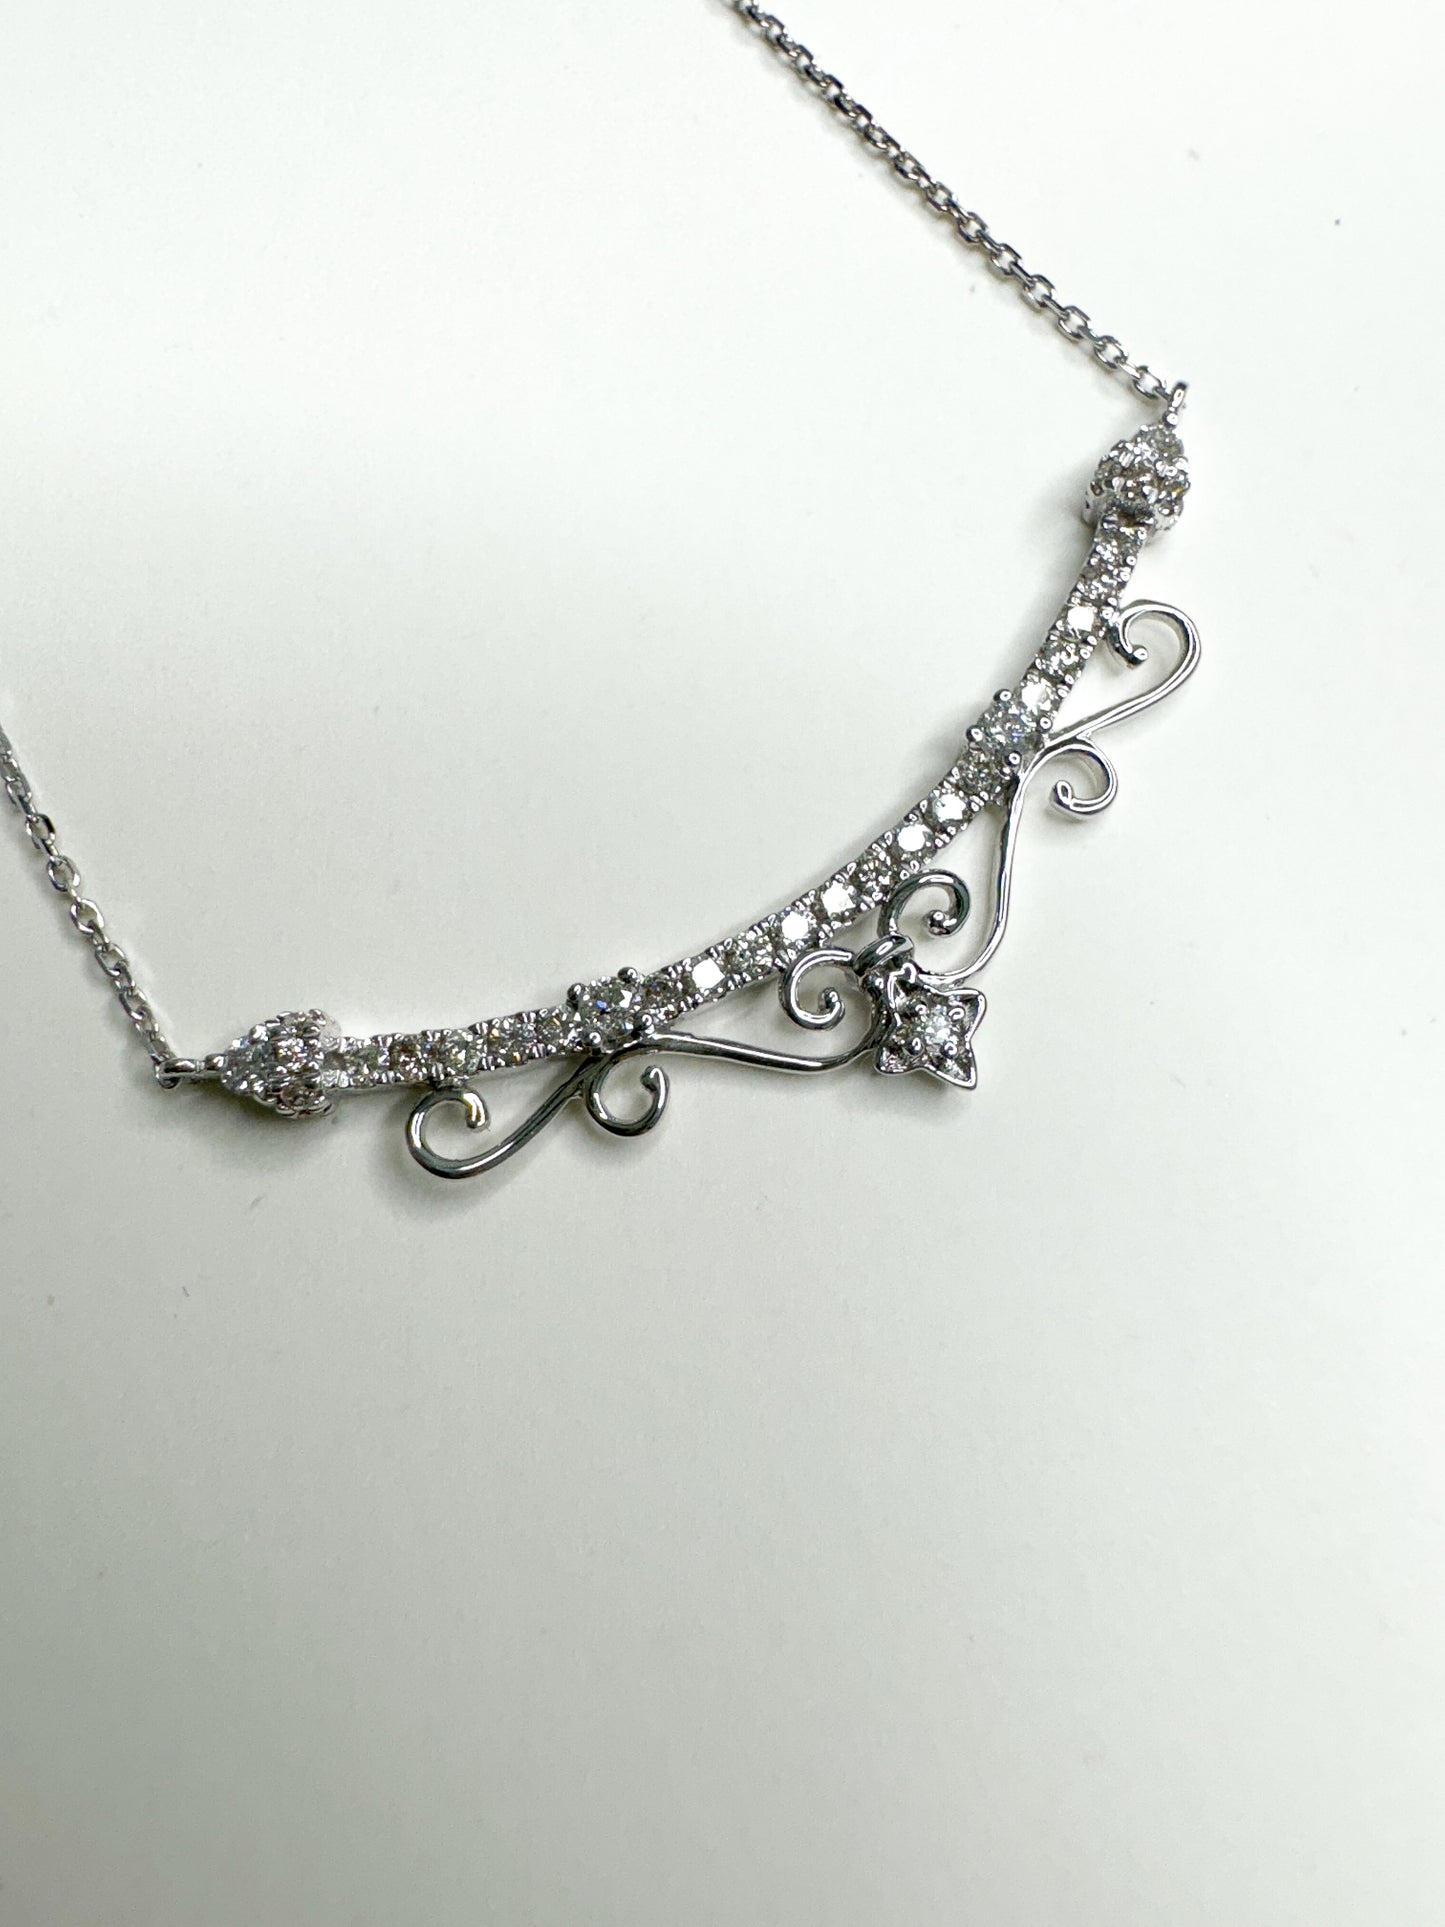 Vintage Inspired 14k White gold and Diamond necklace